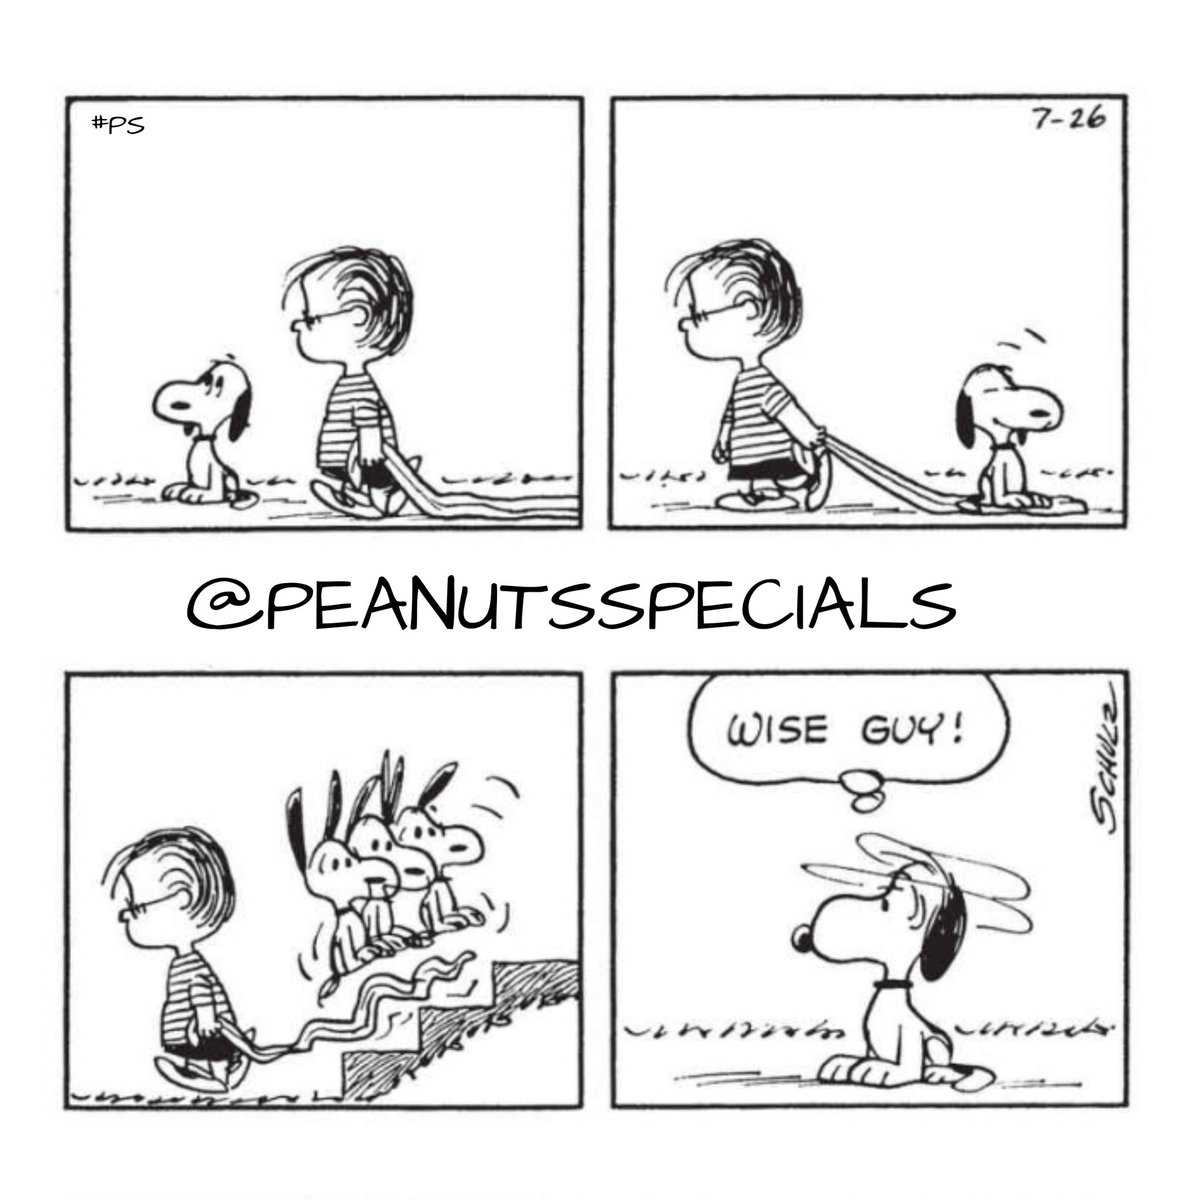 First Appearance: July 26, 1962
#snoopy #linusvanpelt #wiseguy #wise #guy #peanutsmonday #peanutshome #schultz #ps #pnts #peanuts #peanutsspecials